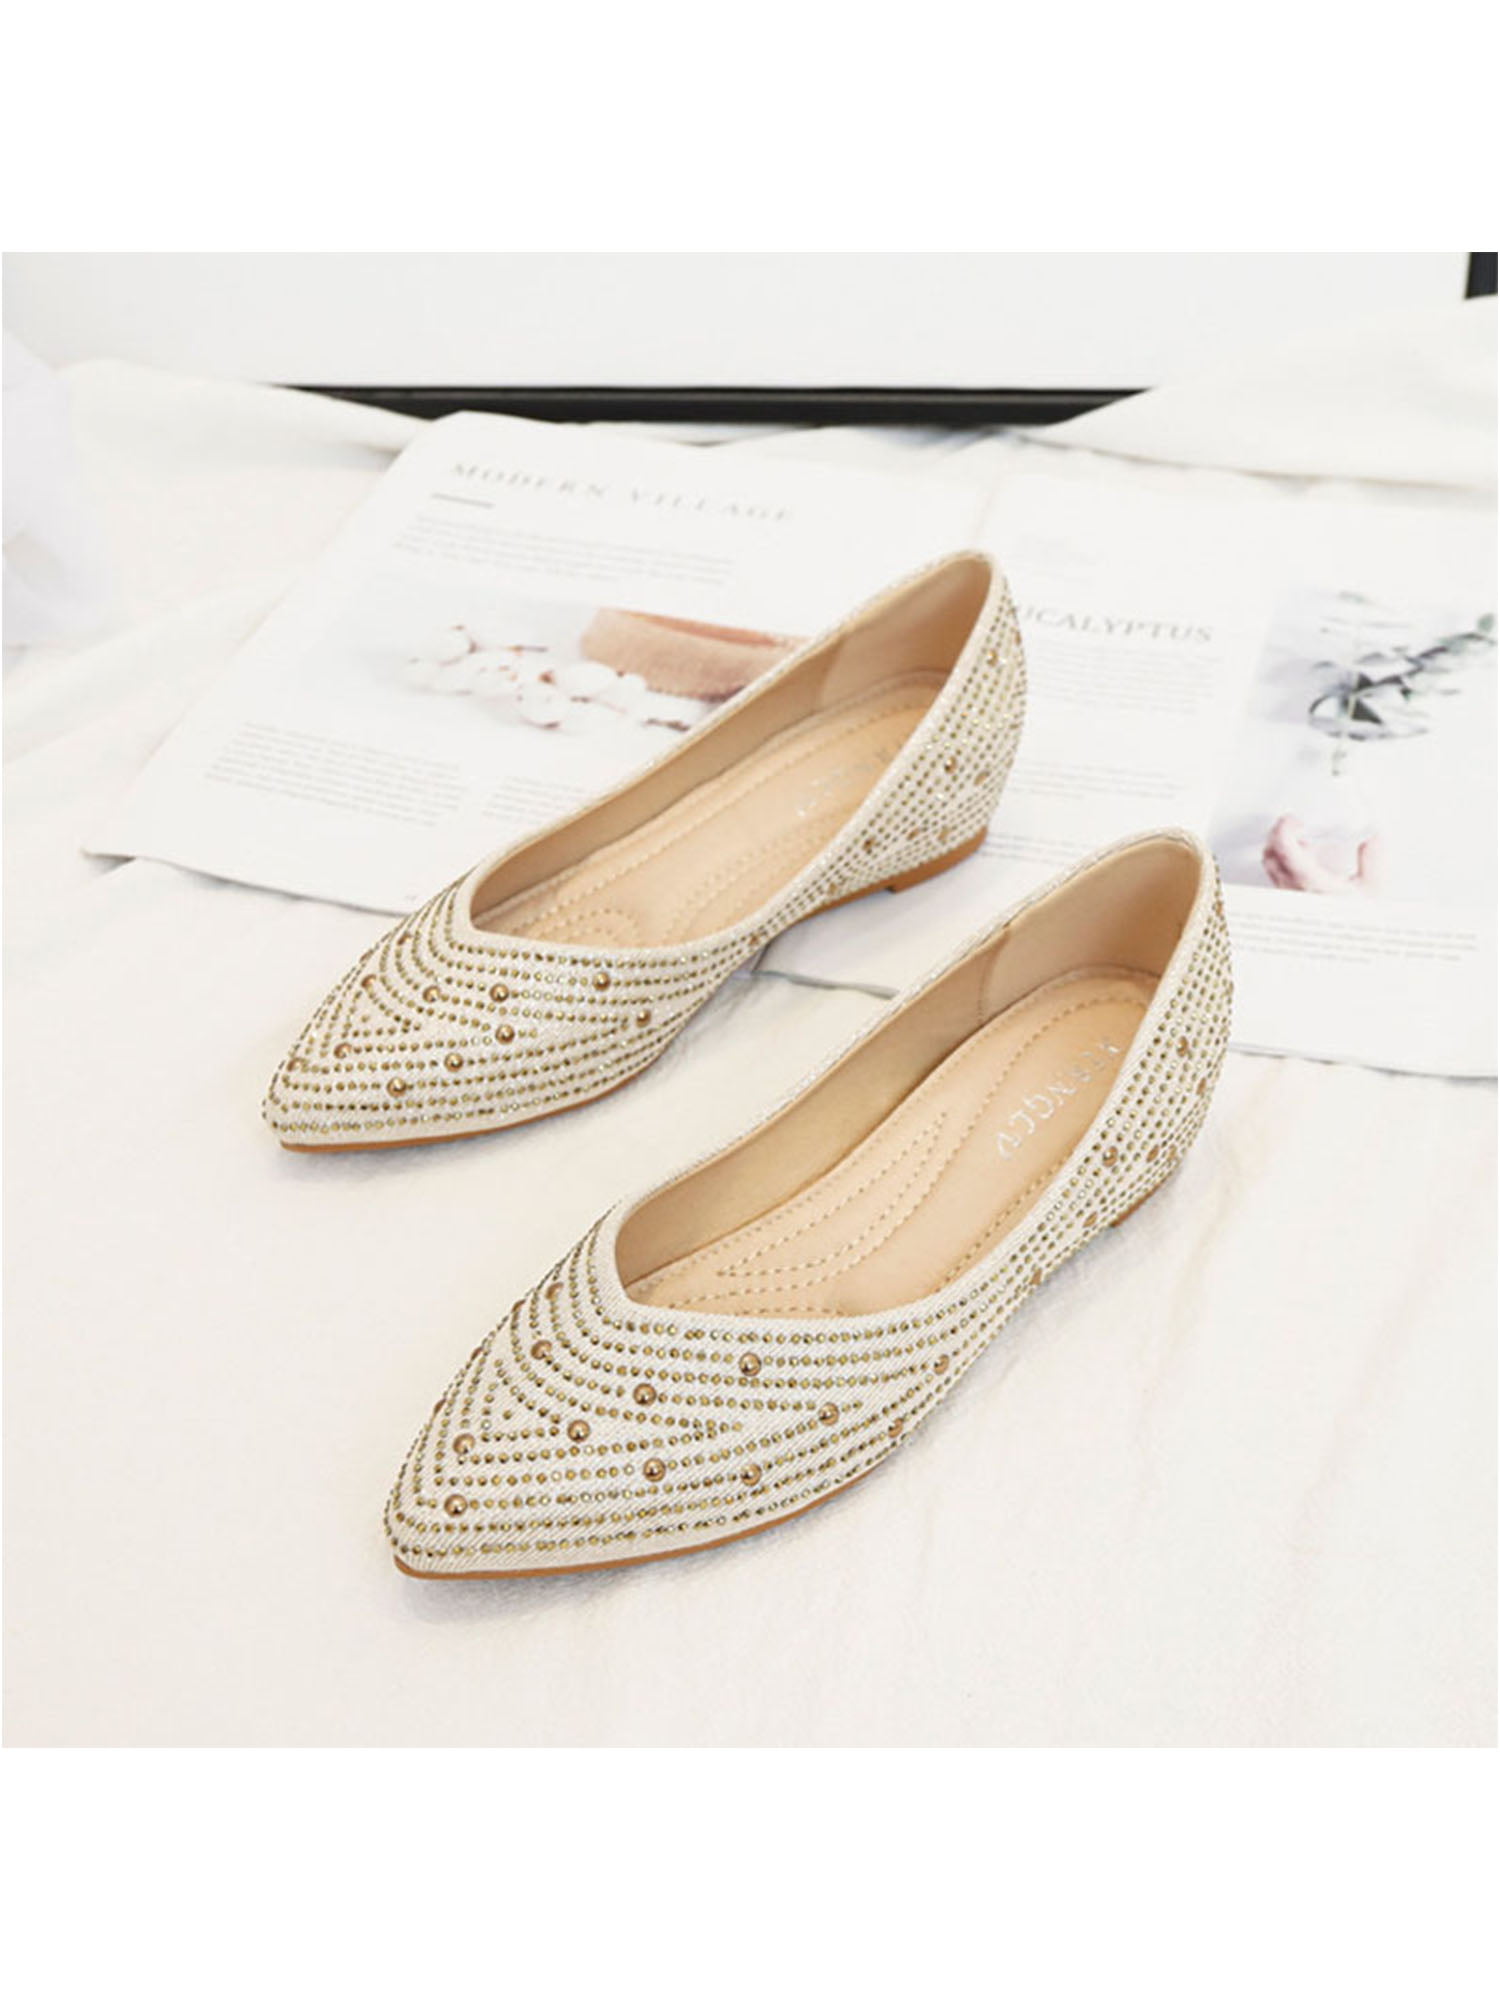 Fashion WOMENS CASUAL COMFORT SLIP ON BALLET FLAT SHOES 